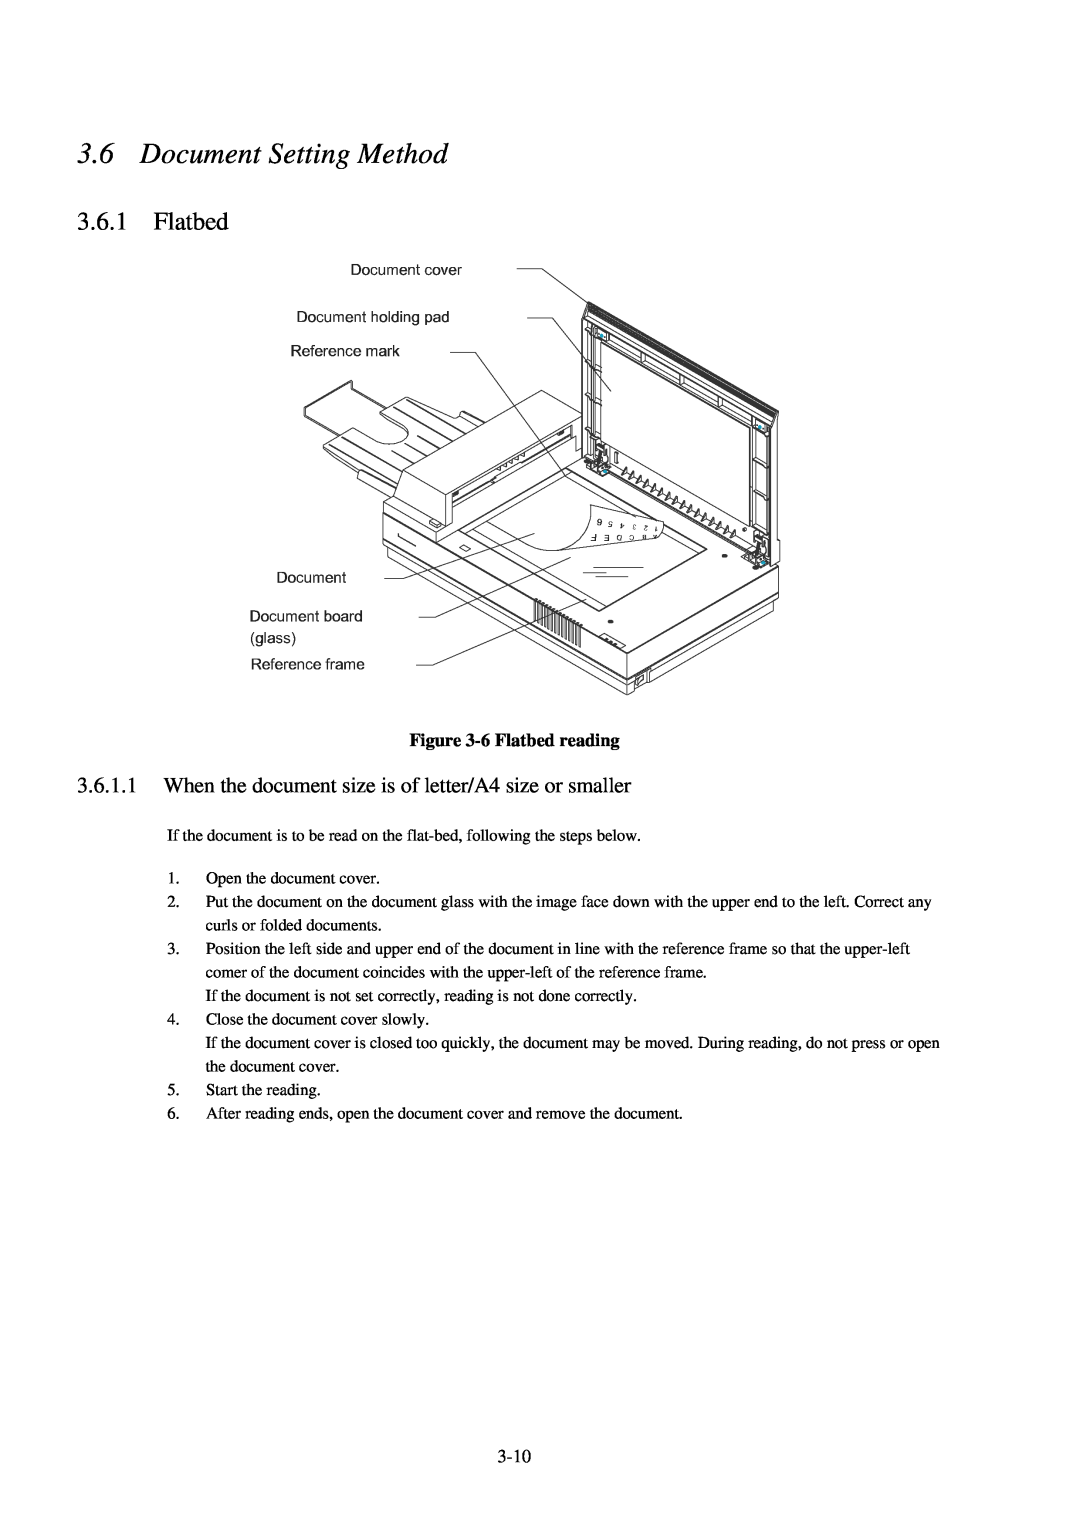 Fujitsu 600C manual Document Setting Method, When the document size is of letter/A4 size or smaller, 6 Flatbed reading 